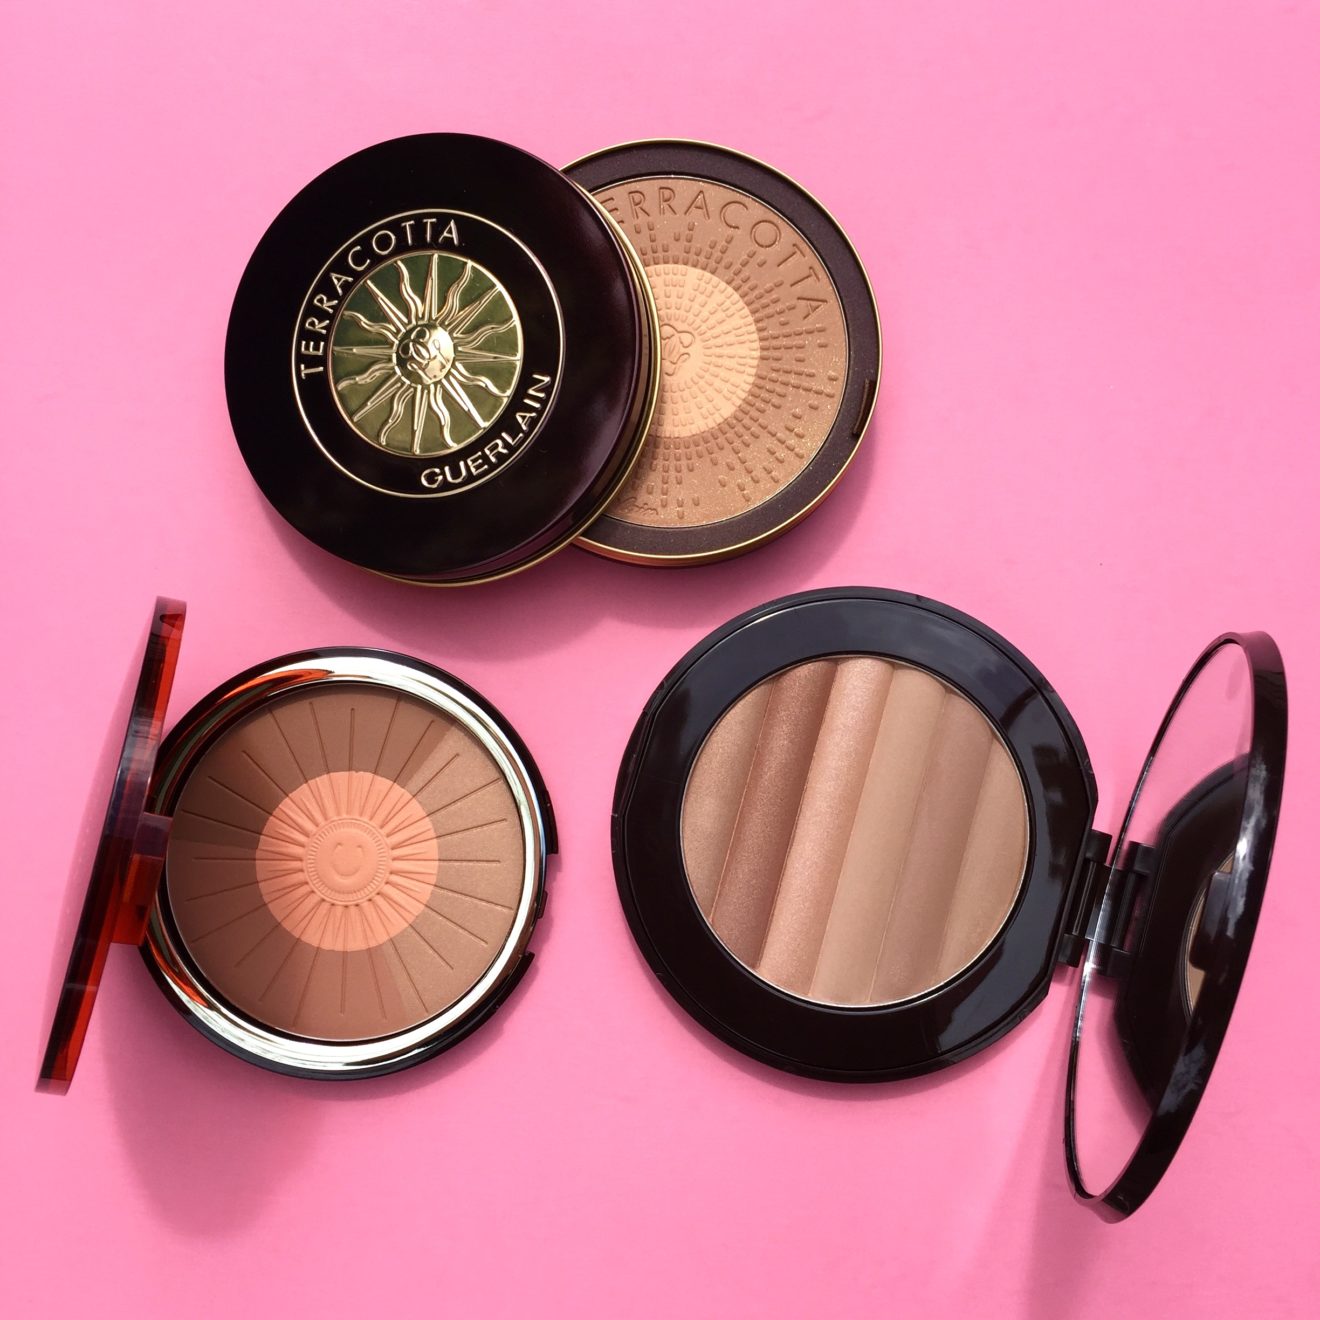 Bronze, Blush, Contour & Highlight All In One: Guerlain, Clarins & PUR Minerals